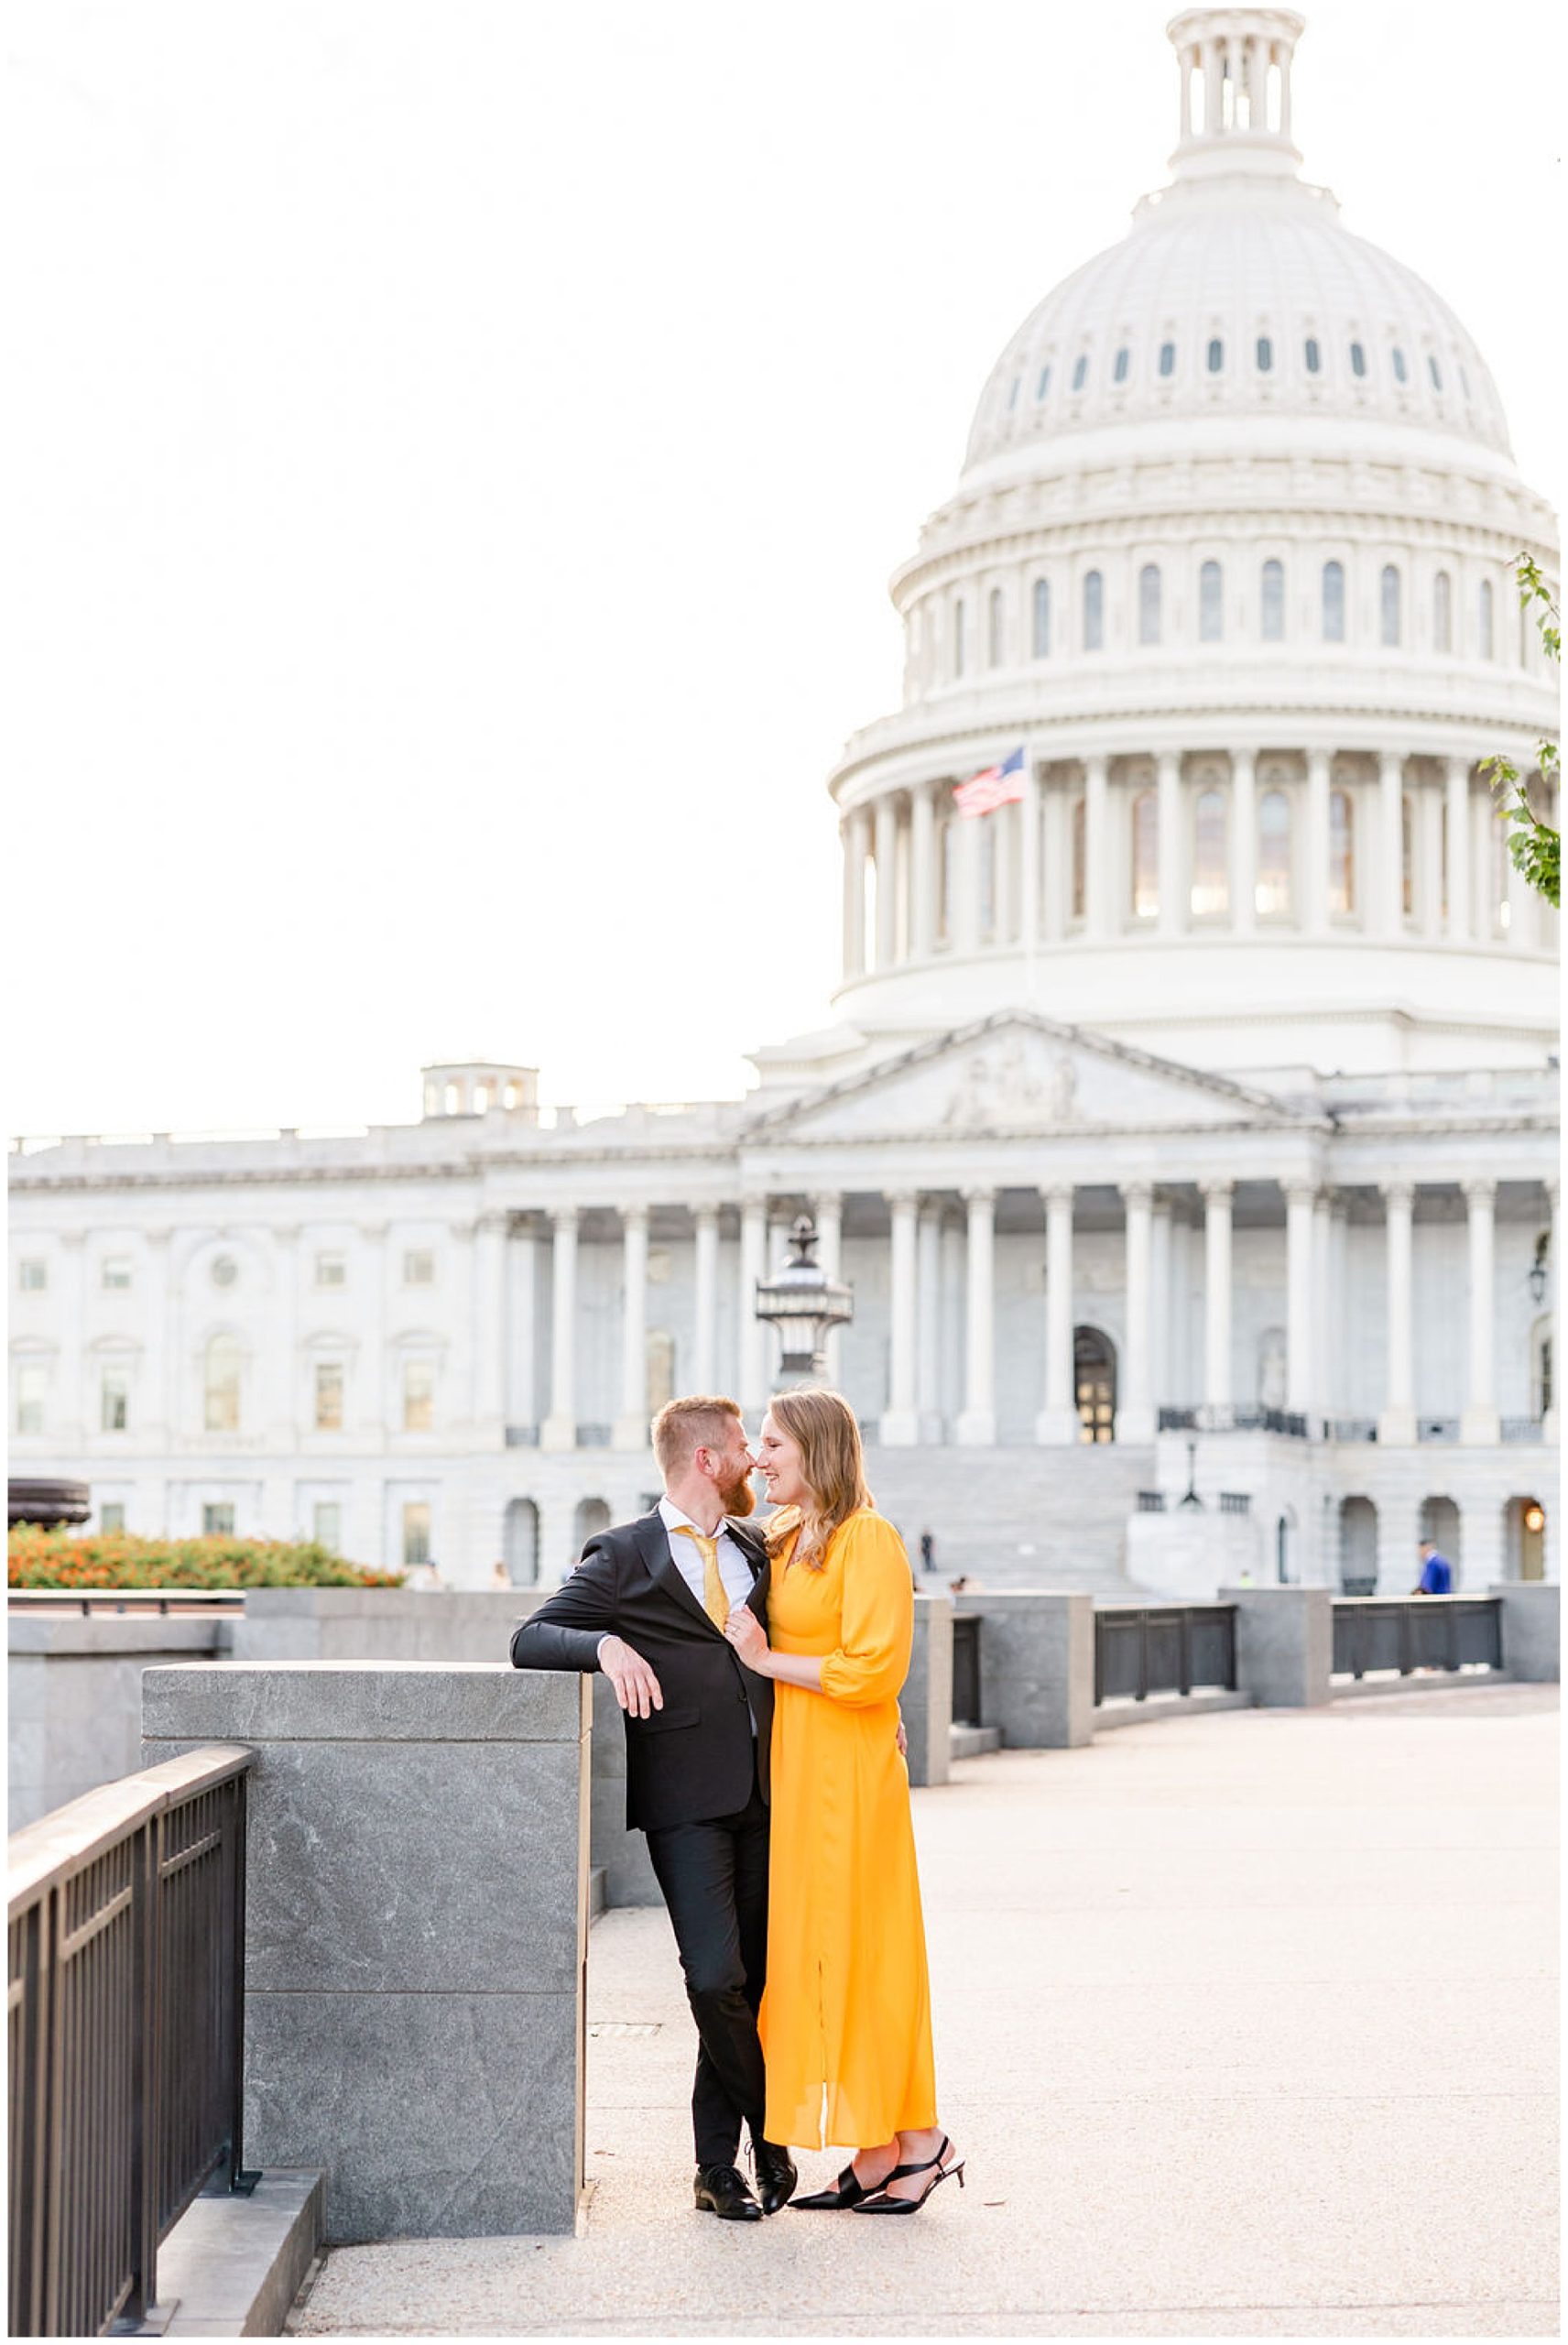 glowing Capitol Hill elopement portraits, Capitol Hill Washington DC, DC elopement portraits, DC elopement photographer, DC wedding photographer, DC portrait photographer, DC photographer, Capitol Hill portraits, autumn portraits, Capitol Hill photographer, Rachel E.H. Photography, couple almost kissing, couple in front of capitol, Carla Pressley Hair and Makeup Artist